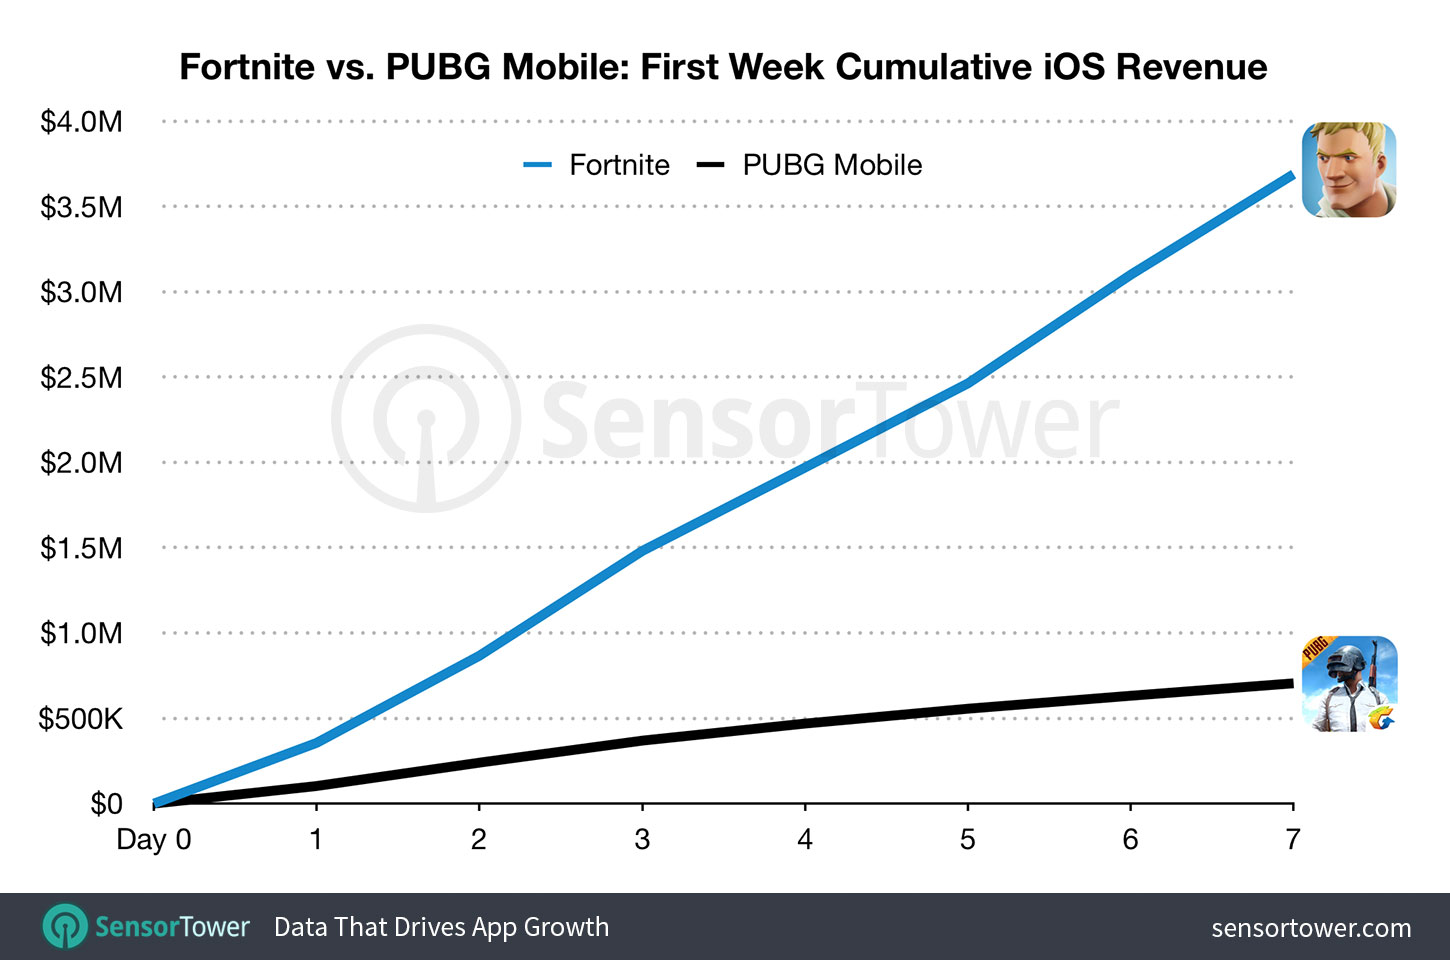 Chart showing Fortnite's cumulative first week's gross revenue compared to PUBG Mobile's on the App Store worldwide